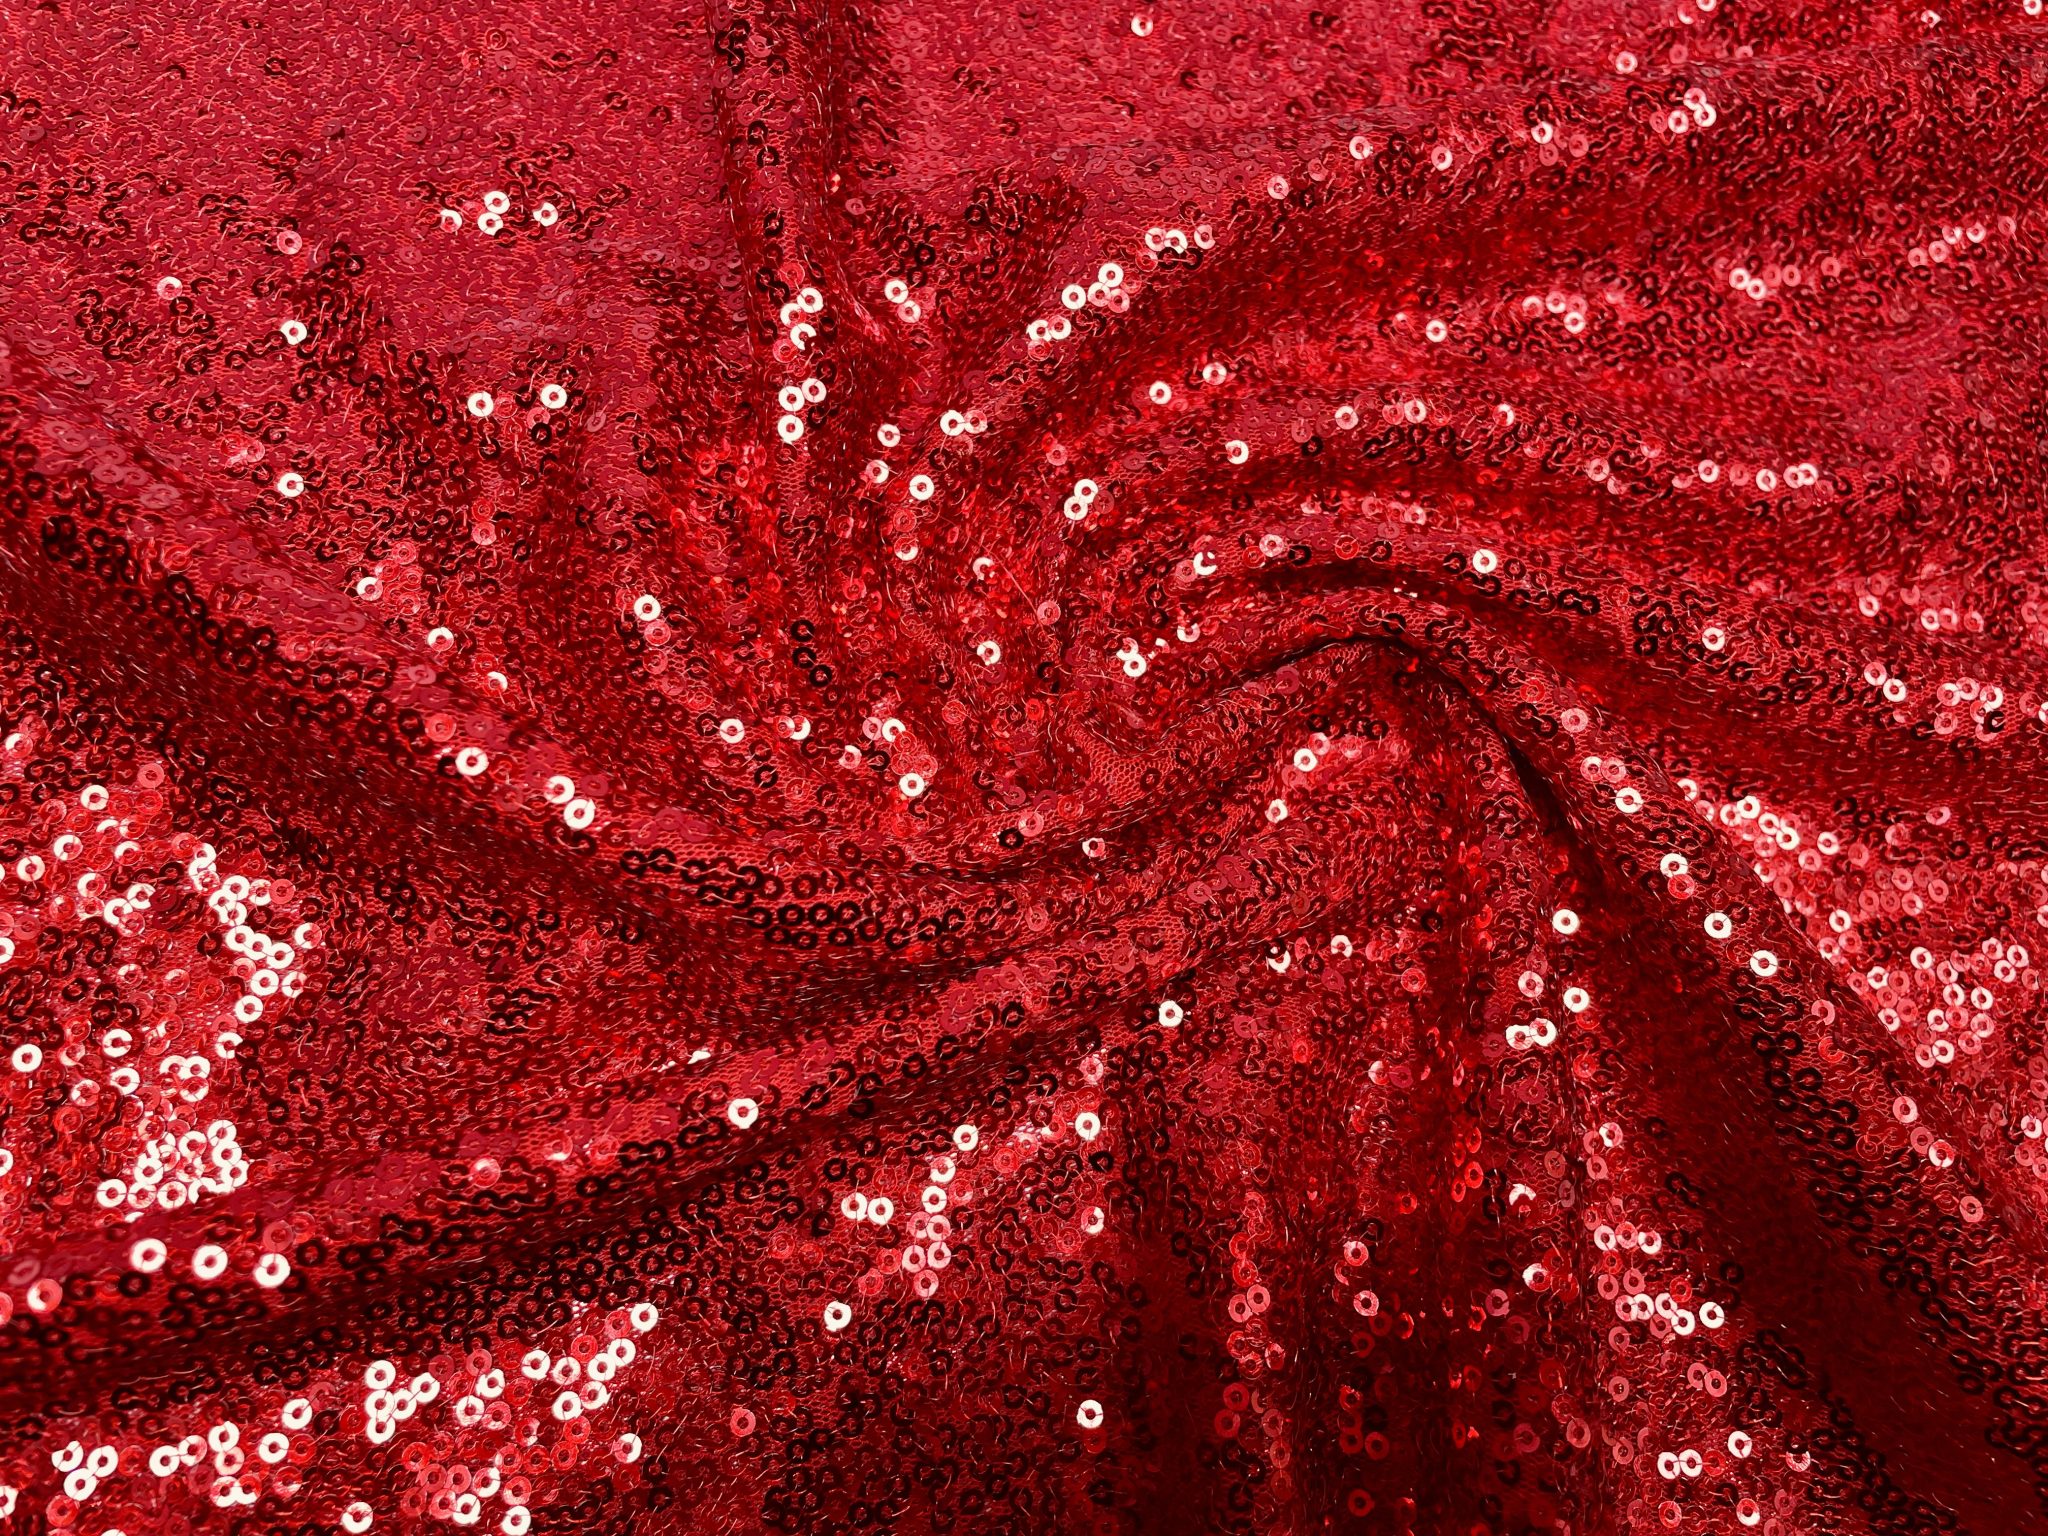 3mm Mini Sequins Fabric Material - 1 way stretch - 130cm or 51